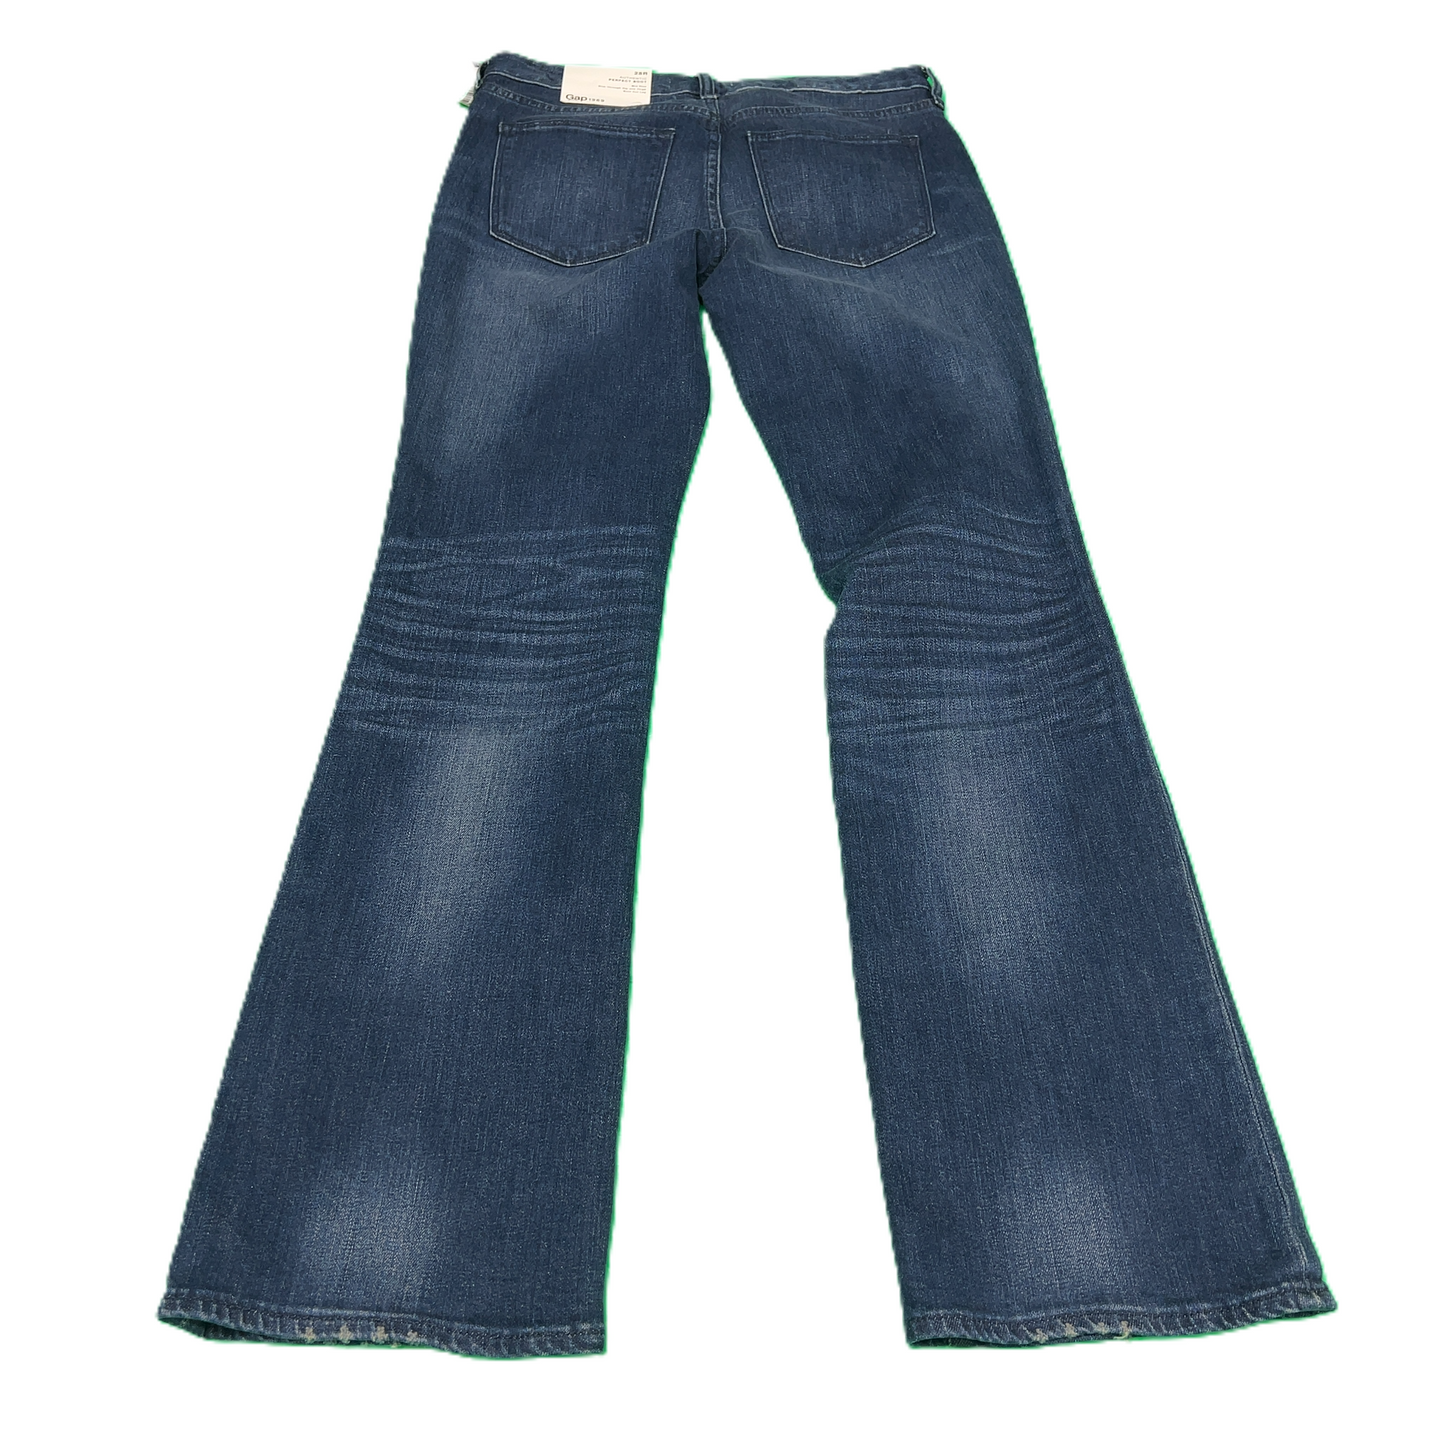 Jeans Boot Cut By Gap  Size: 6